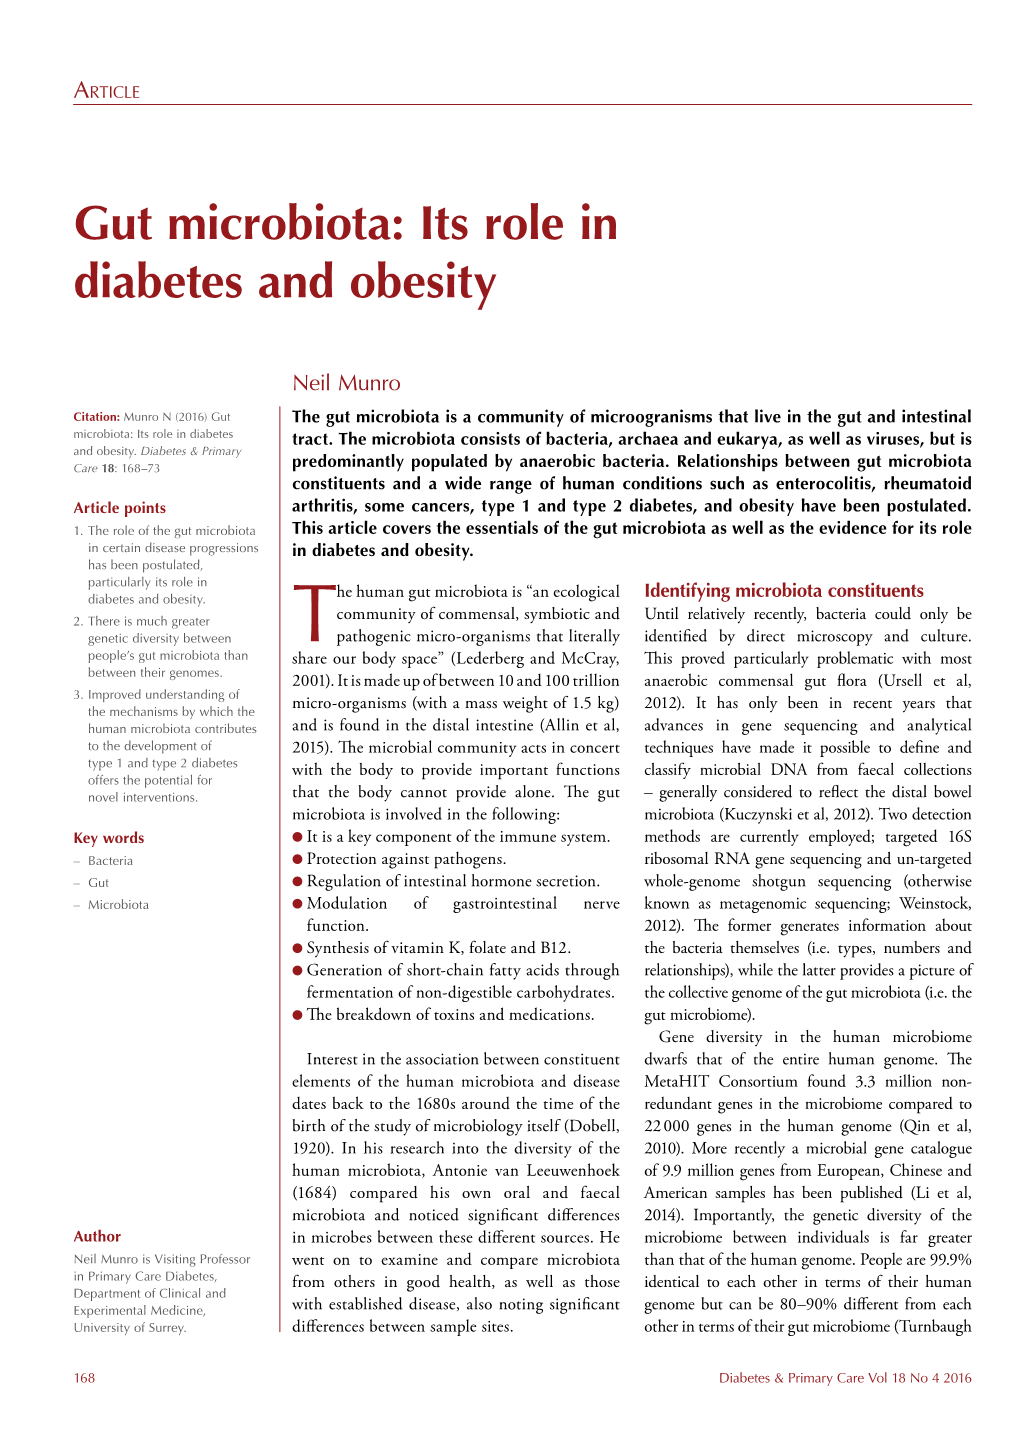 Gut Microbiota: Its Role in Diabetes and Obesity